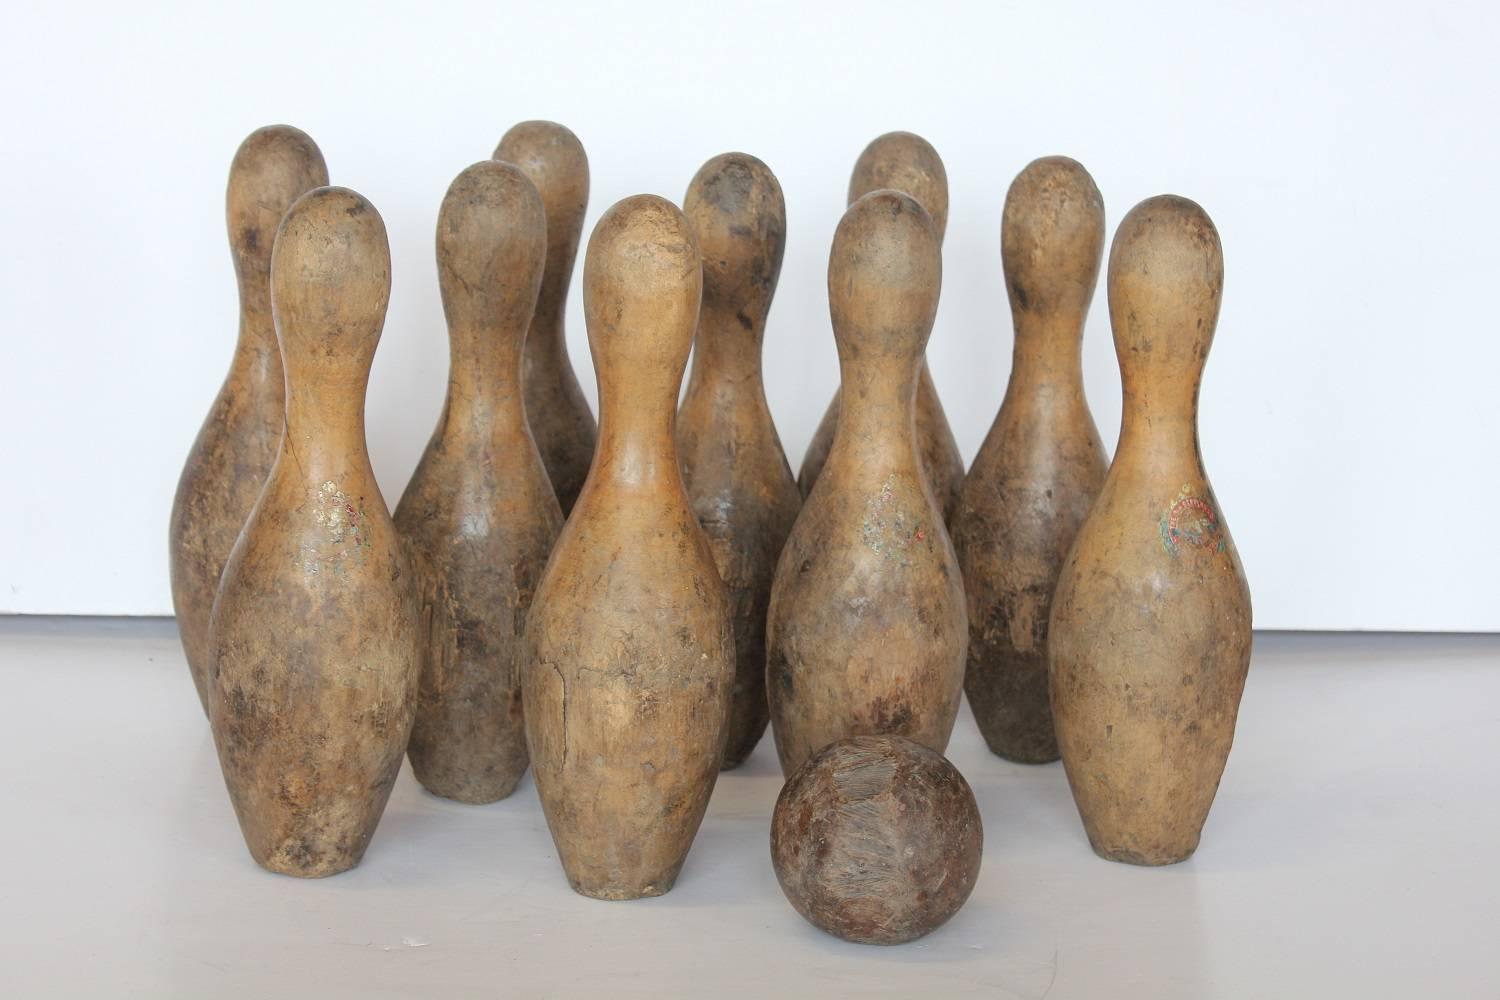 Antique Bowling Set. It includes 10 pins and one ball